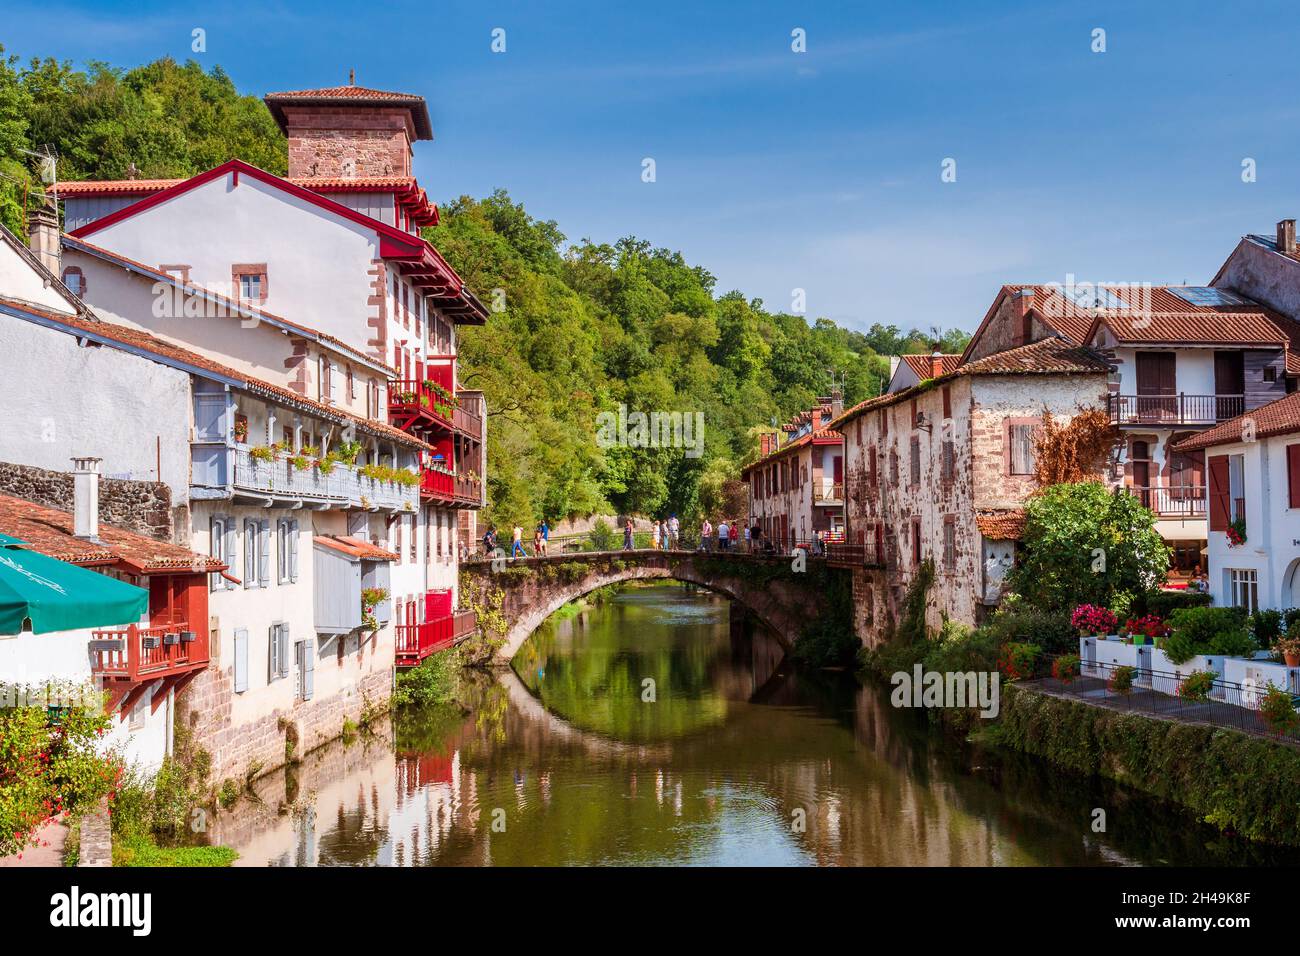 Panoramic view of French white town with red balconies and flowers crossed by a tranquil river. Saint-Jean-Pied-de-Port, France Stock Photo